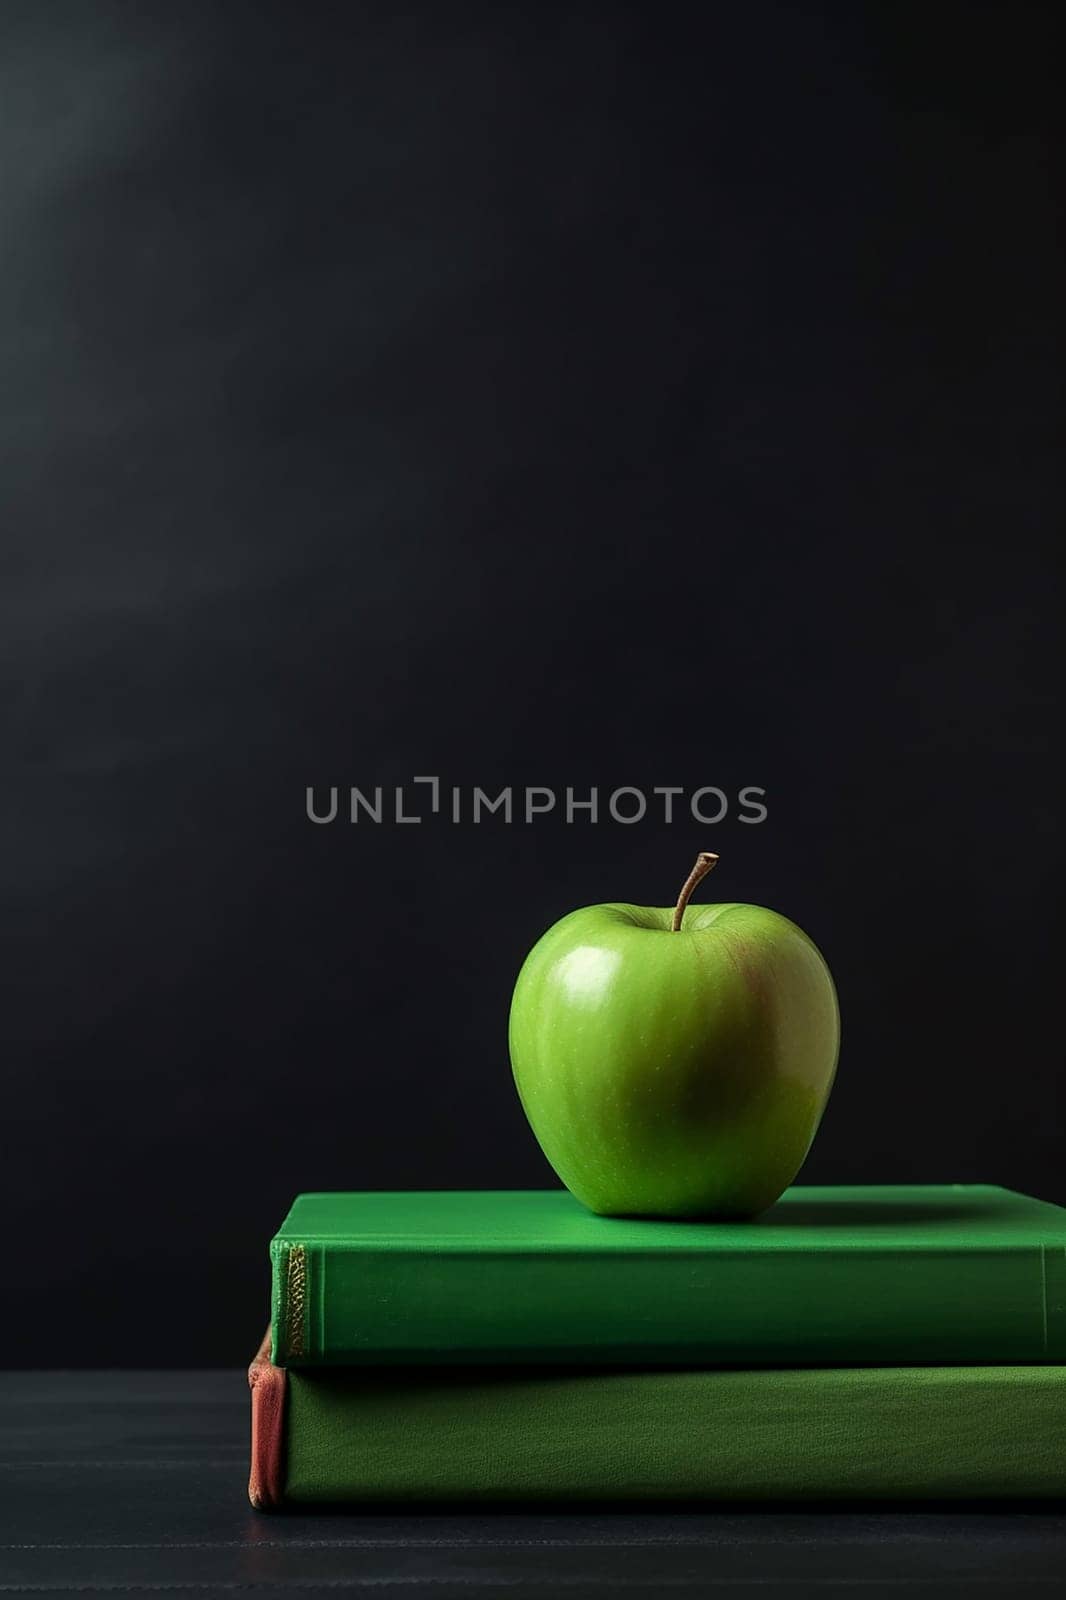 Green apple resting on two green books against a black background.